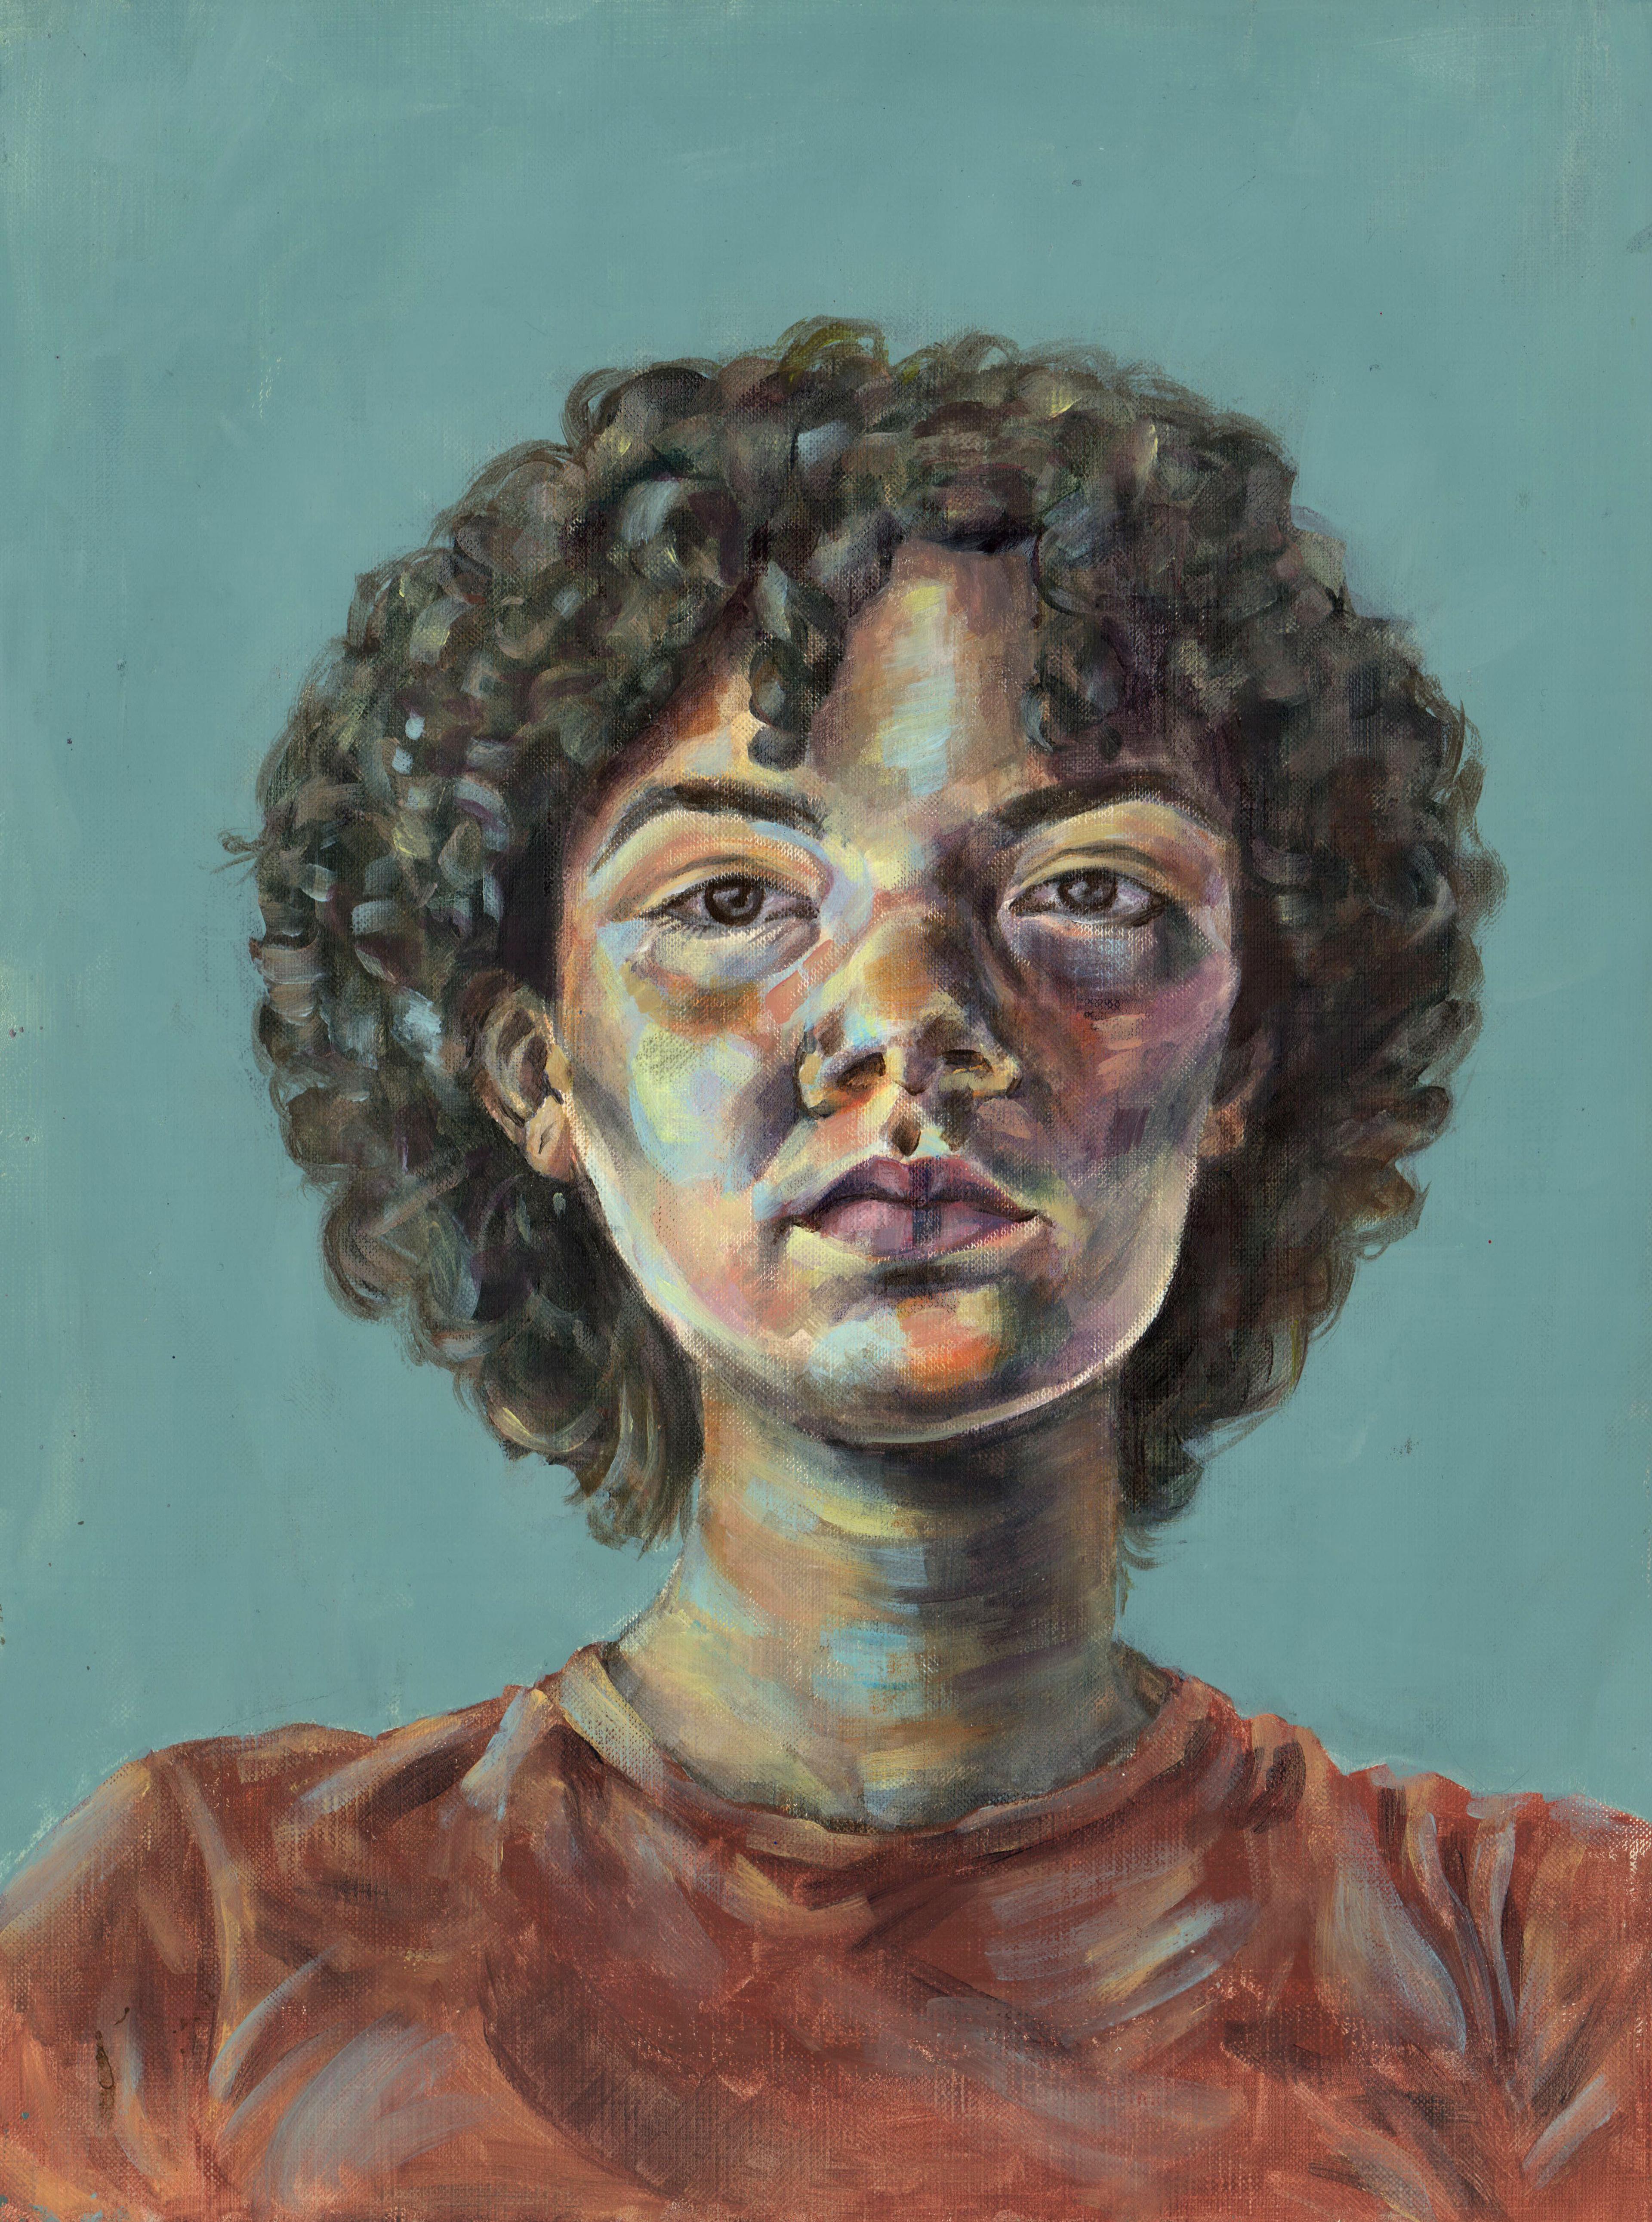 Acrylic self-portrait of an adolescent girl with brown, curly, neck-length hair. The girl faces the viewer and wears a red shirt in front of a pale green-gray background. Her chin is slightly raised and her eyebrows are slightly arched.